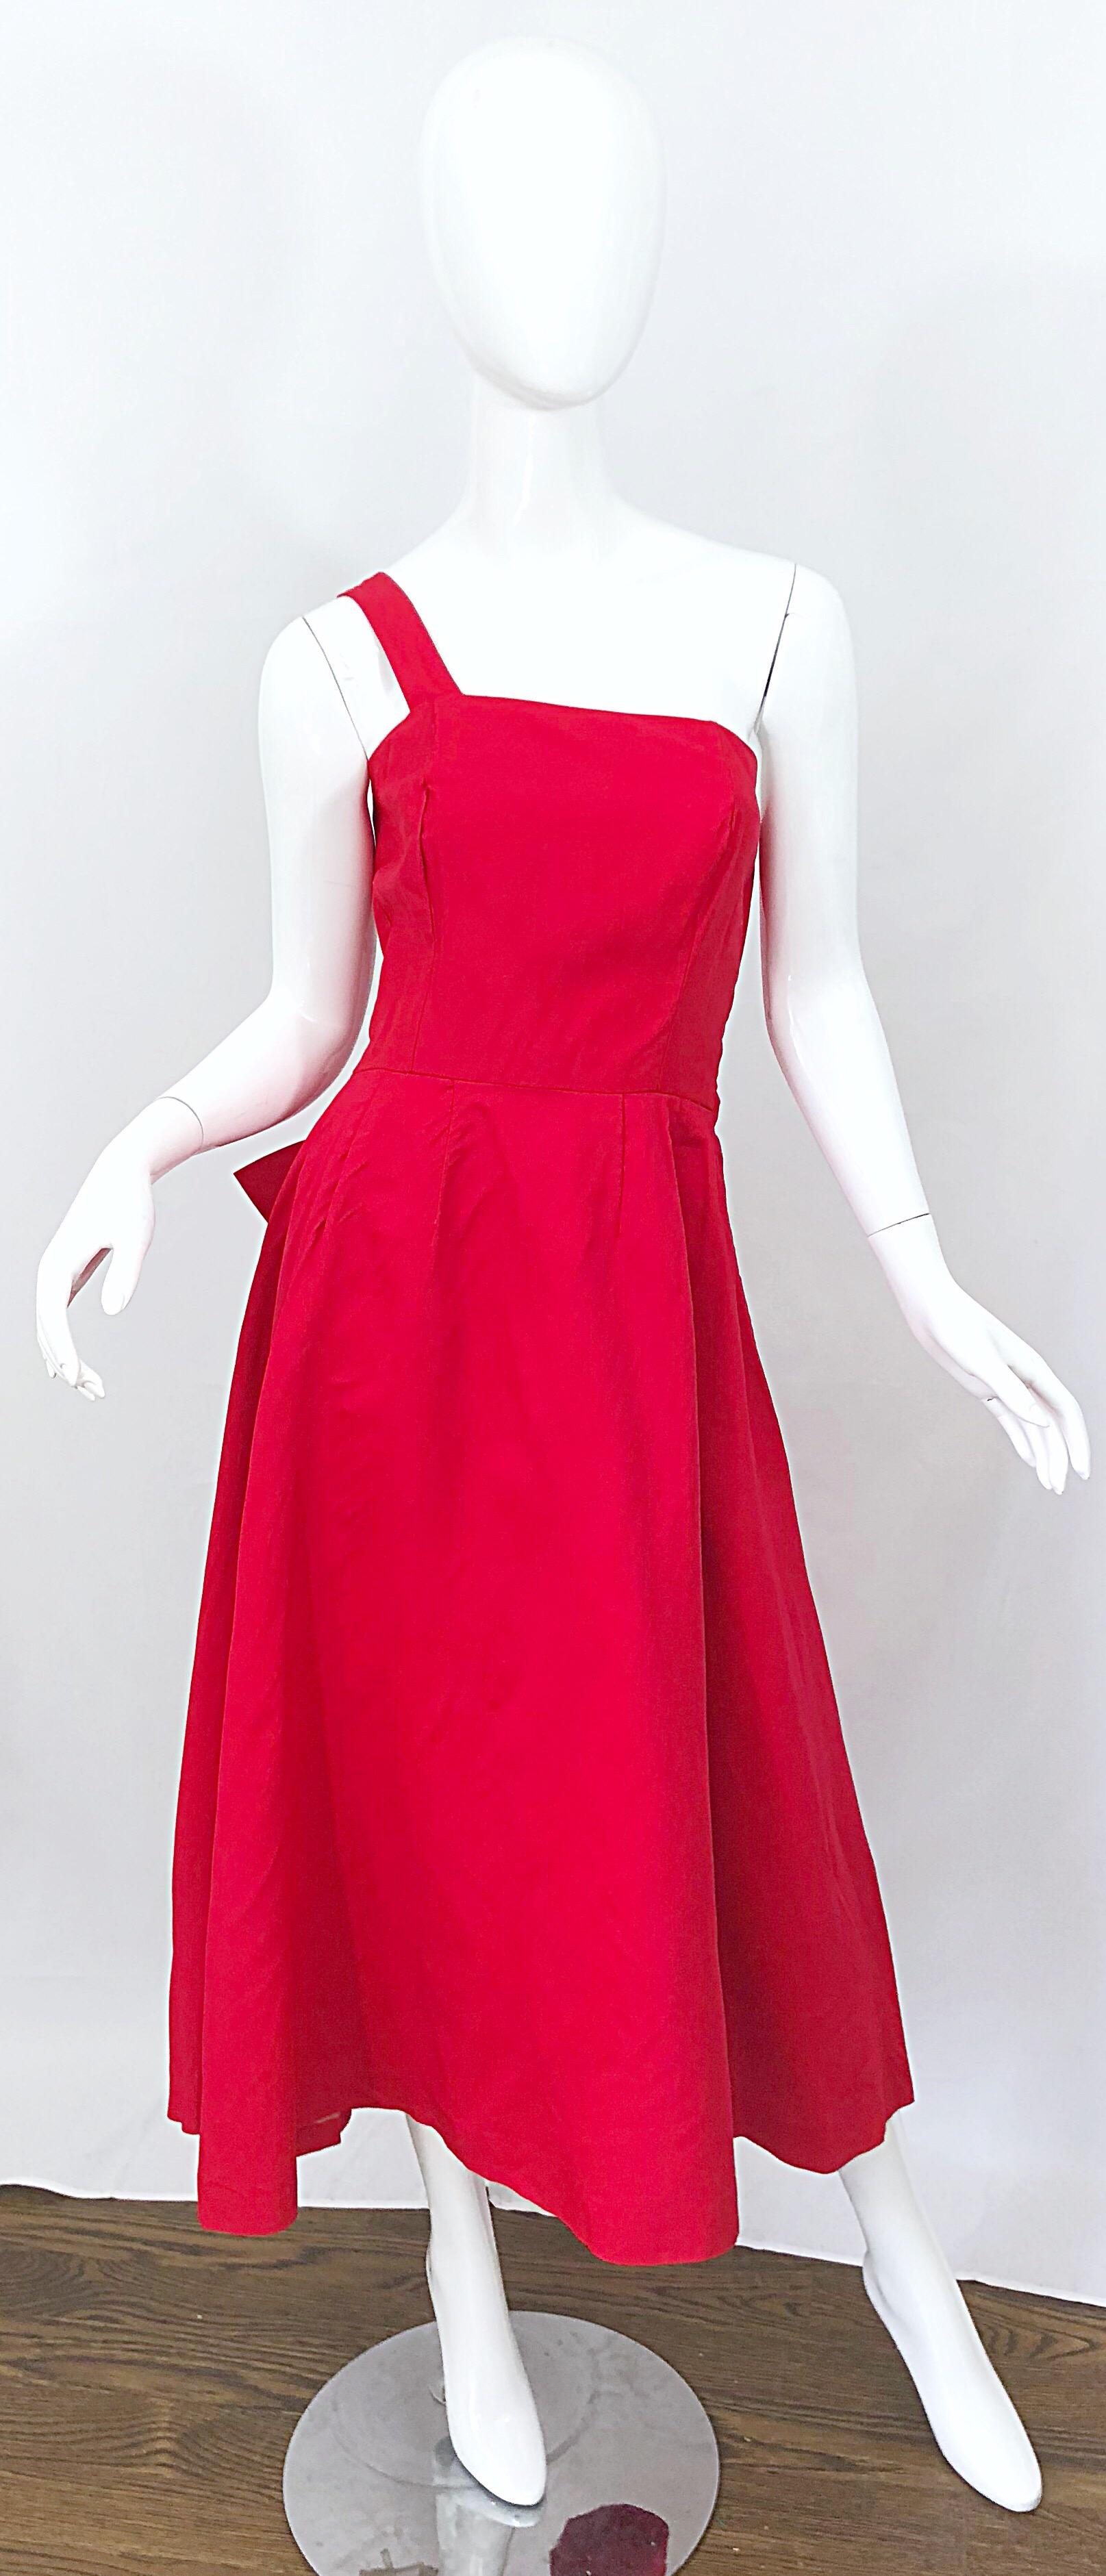 Rare and exquisite Avant Garde BESS MYERSON by Natlynn Demi Couture lipstick red and white one shoulder silk dress! Bess Myerson was a Miss America winner in 1945. She also dabbled into fashion, but her true love was politics.
This beauty features a